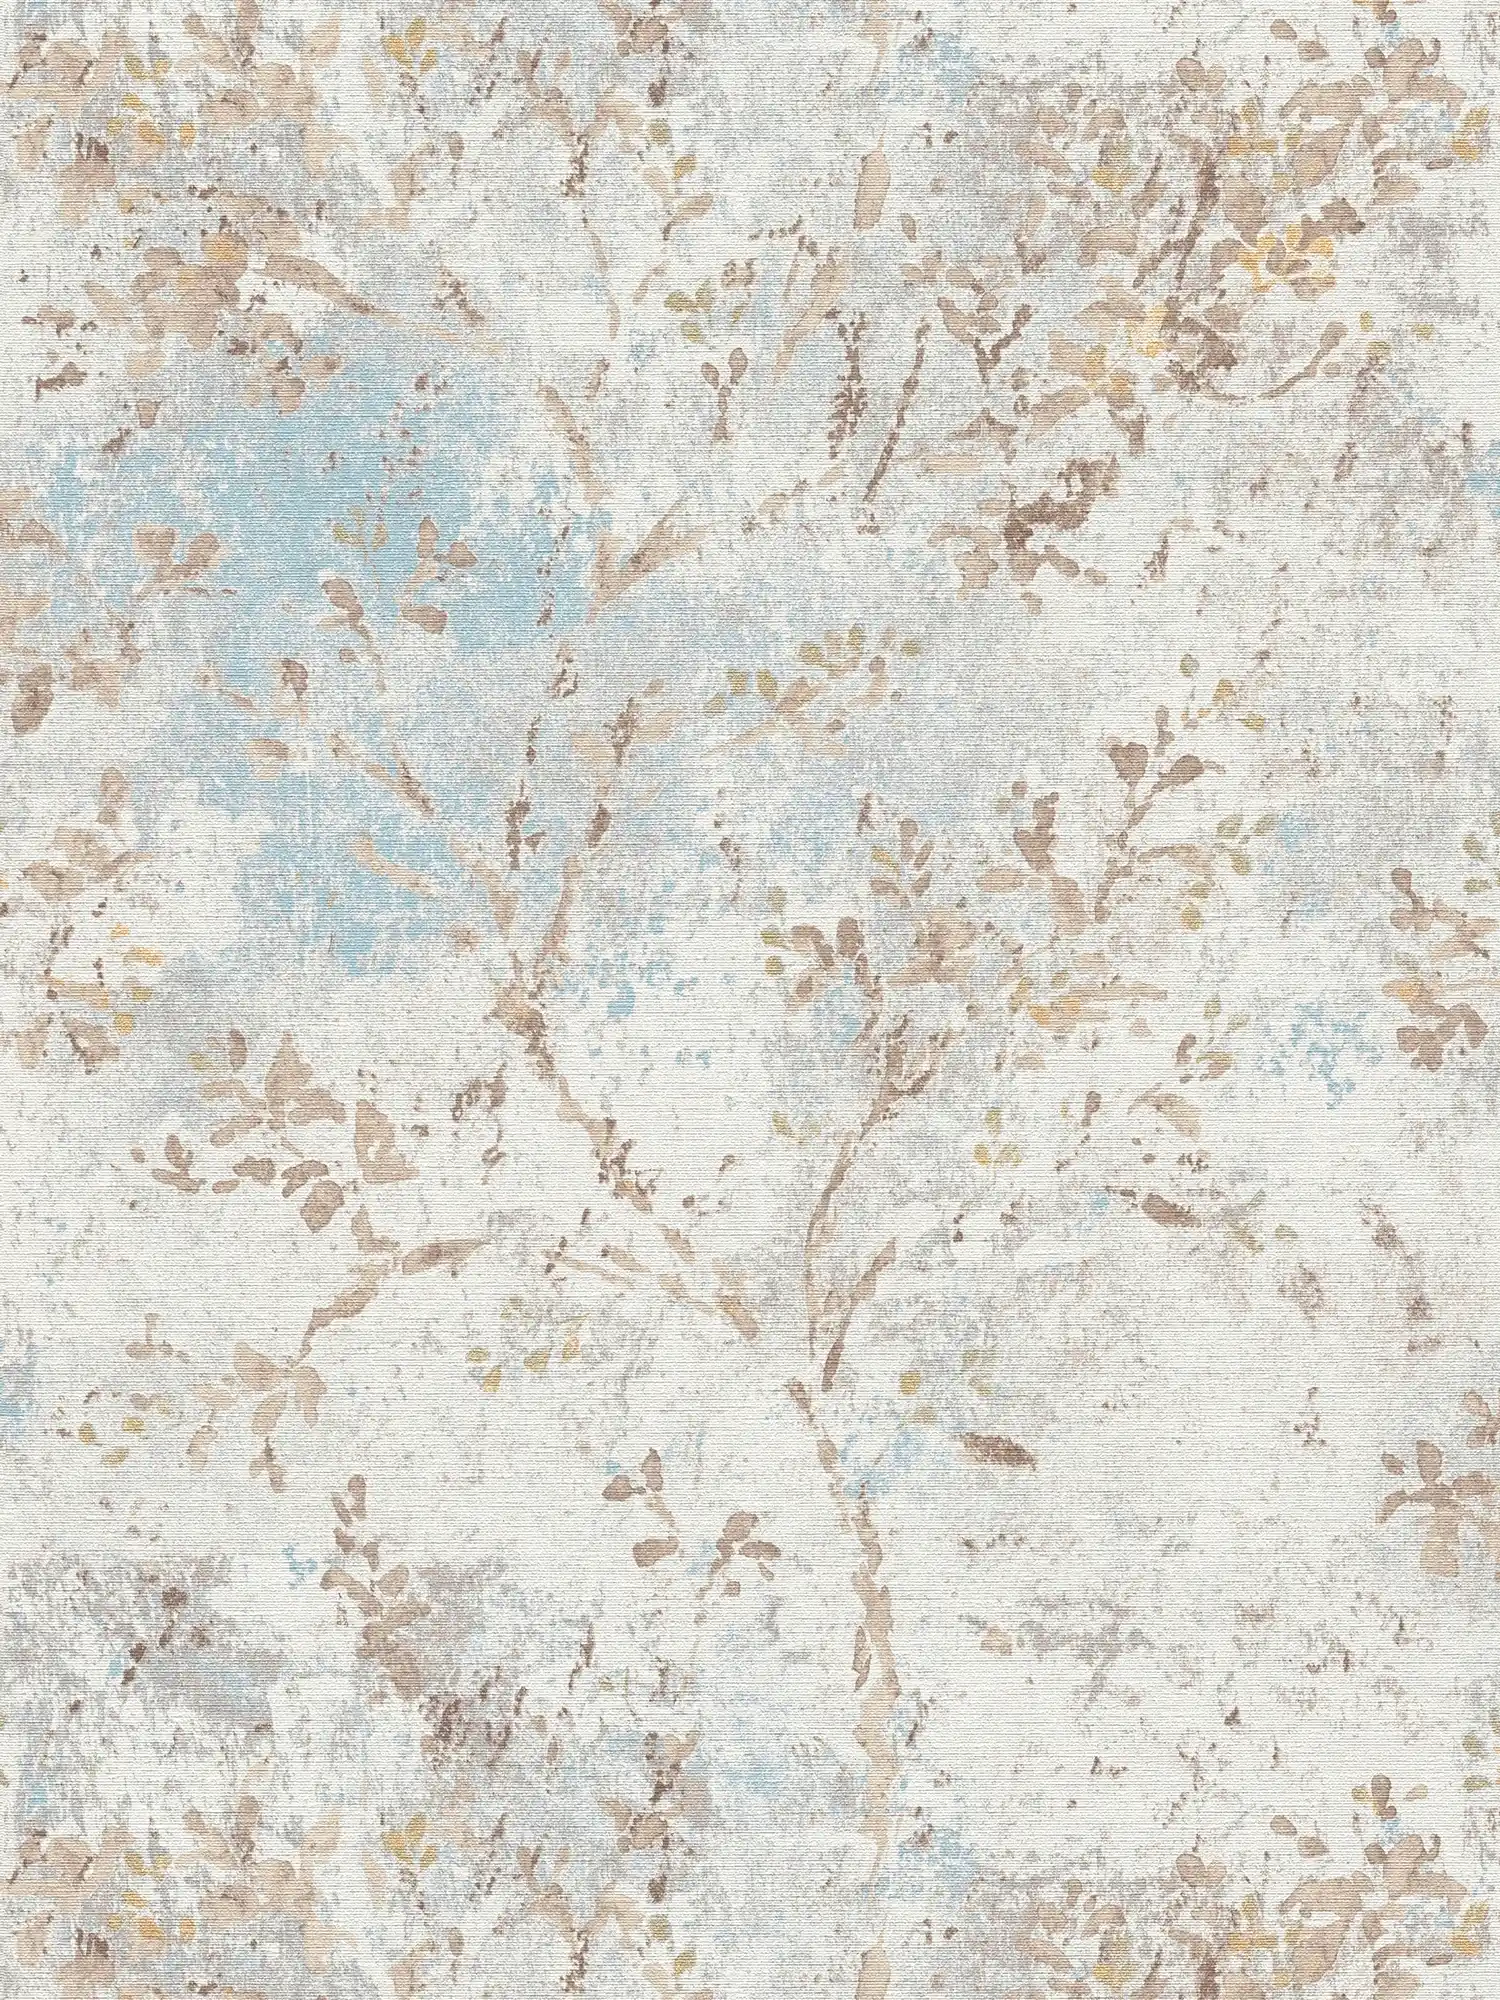 Non-woven wallpaper with a floral watercolour look - blue, beige, gold
